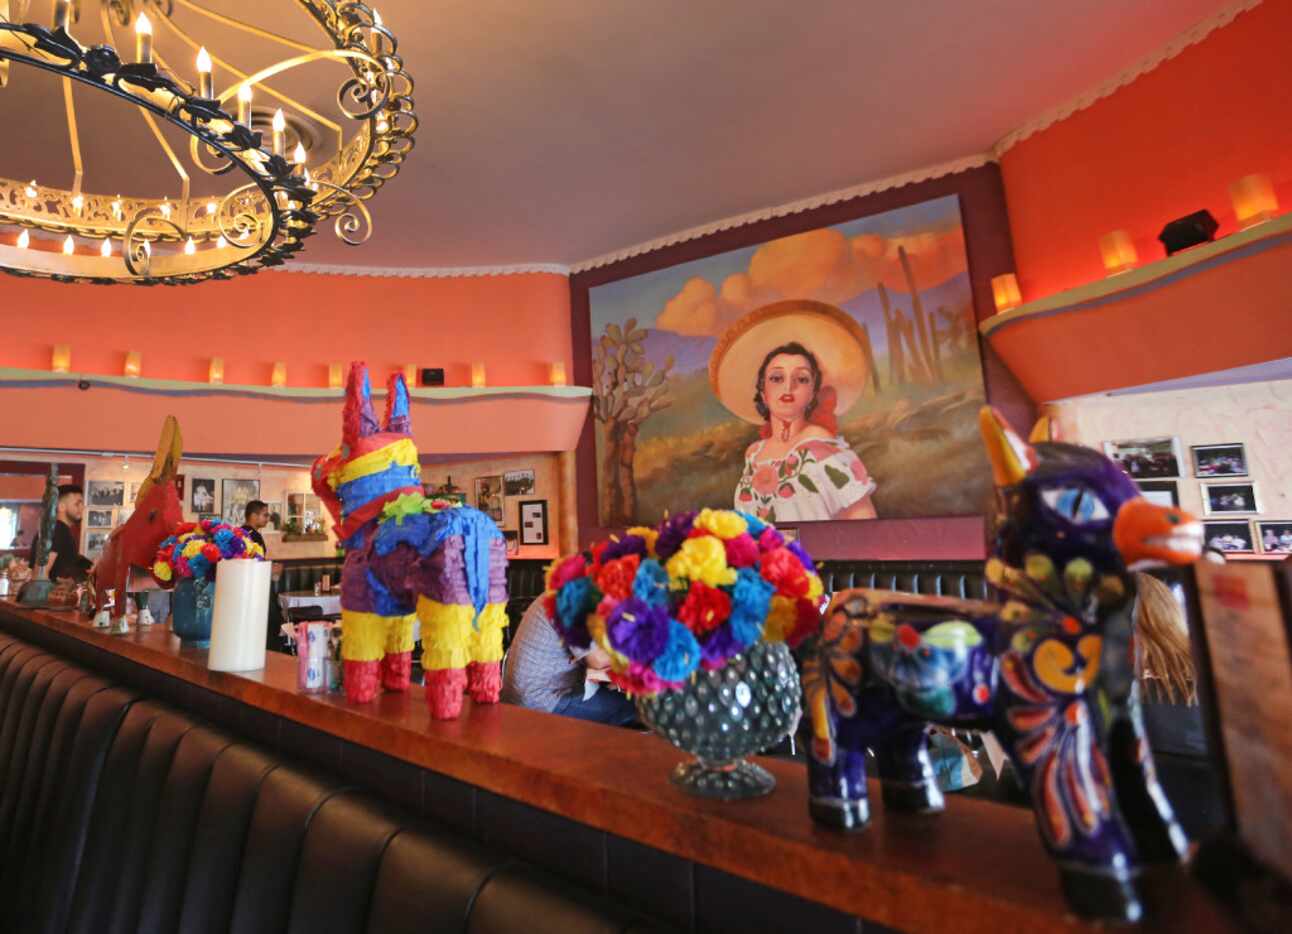 El Corazon Mexican Restaurant is situated along the Dallas streetcar route in Oak Cliff near...